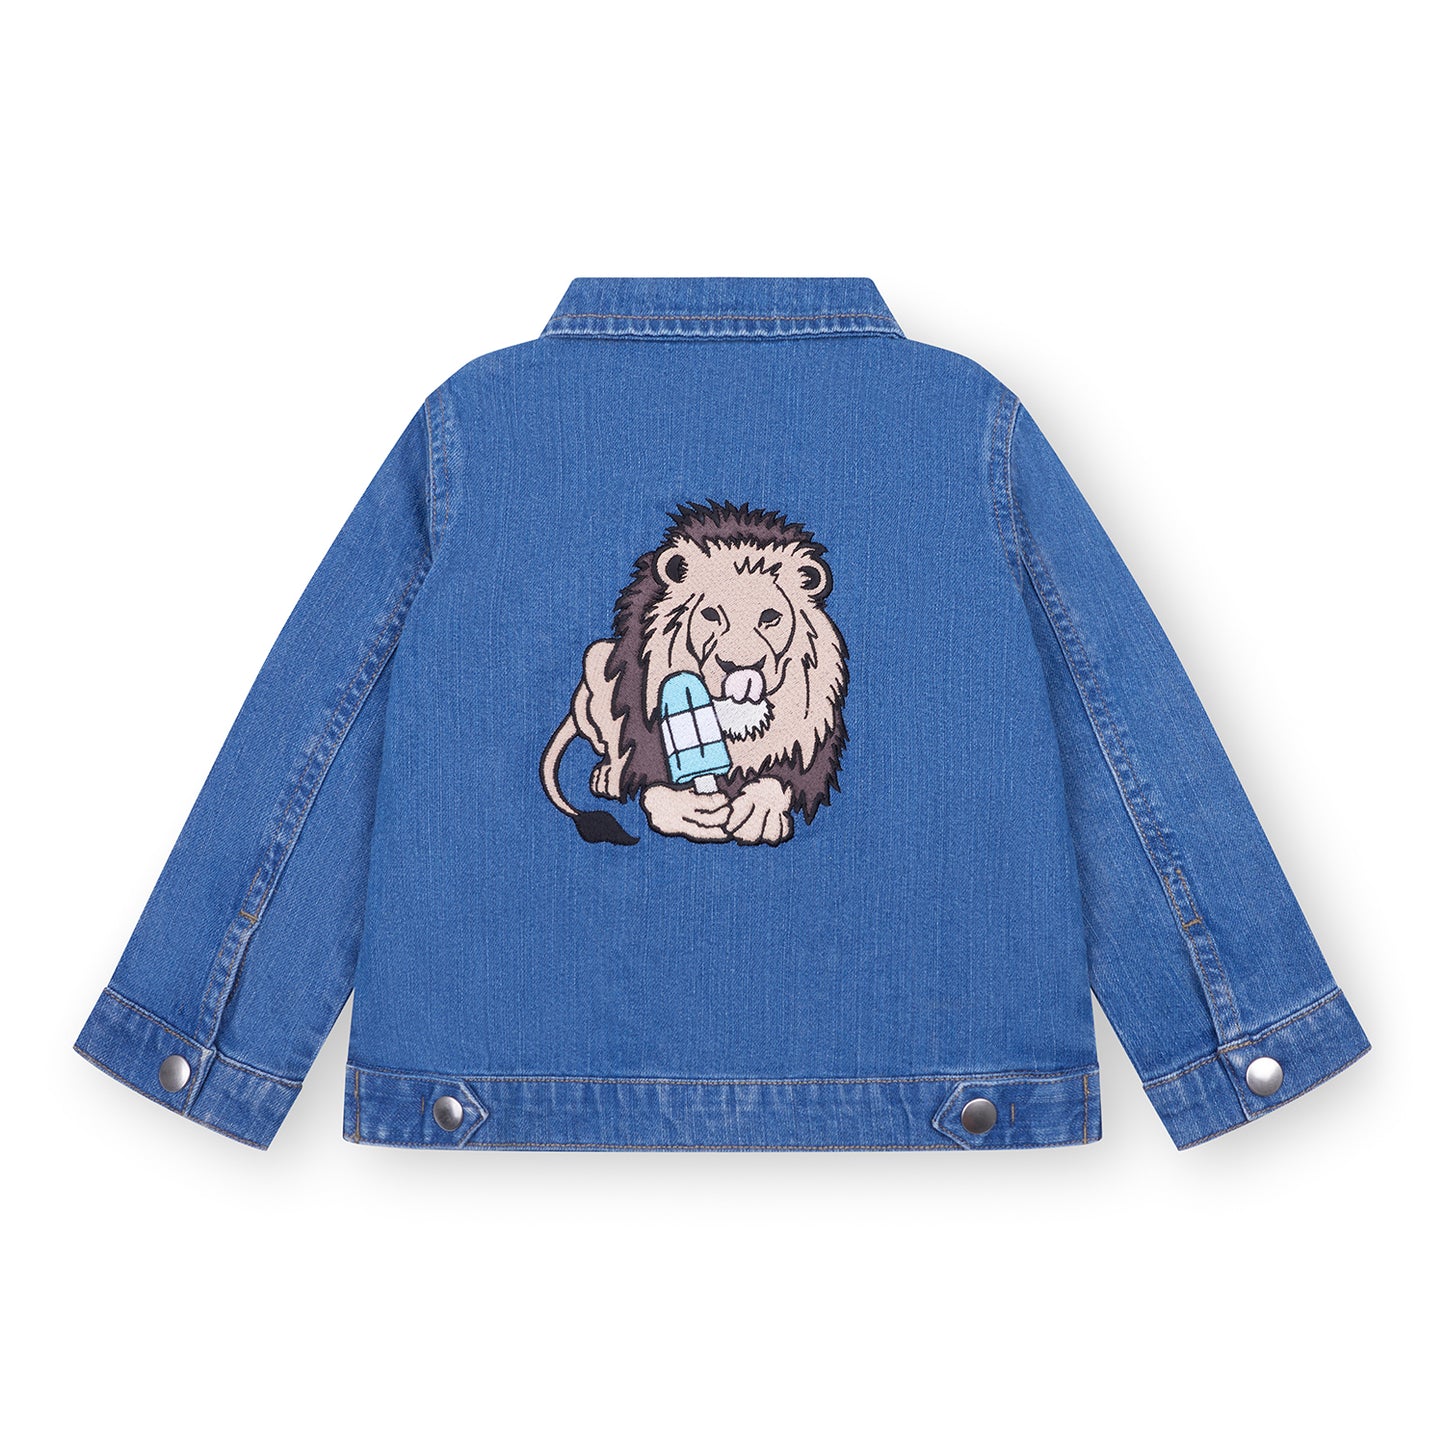 Babies denim jacket - Lion with ice lolly